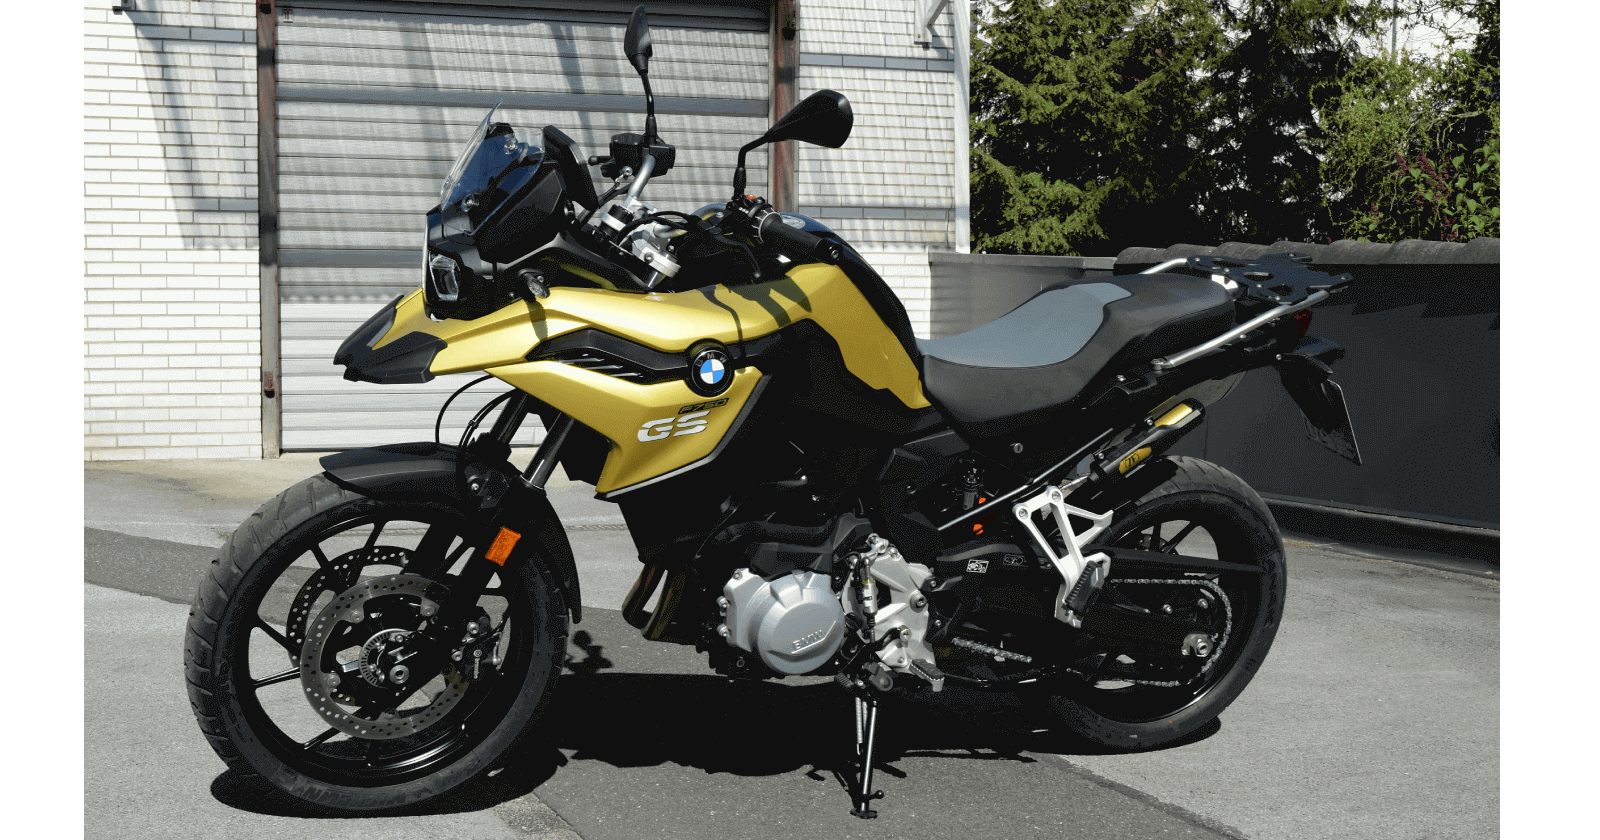 Upcoming BMW Bikes in India: Expected Launch Date and Price